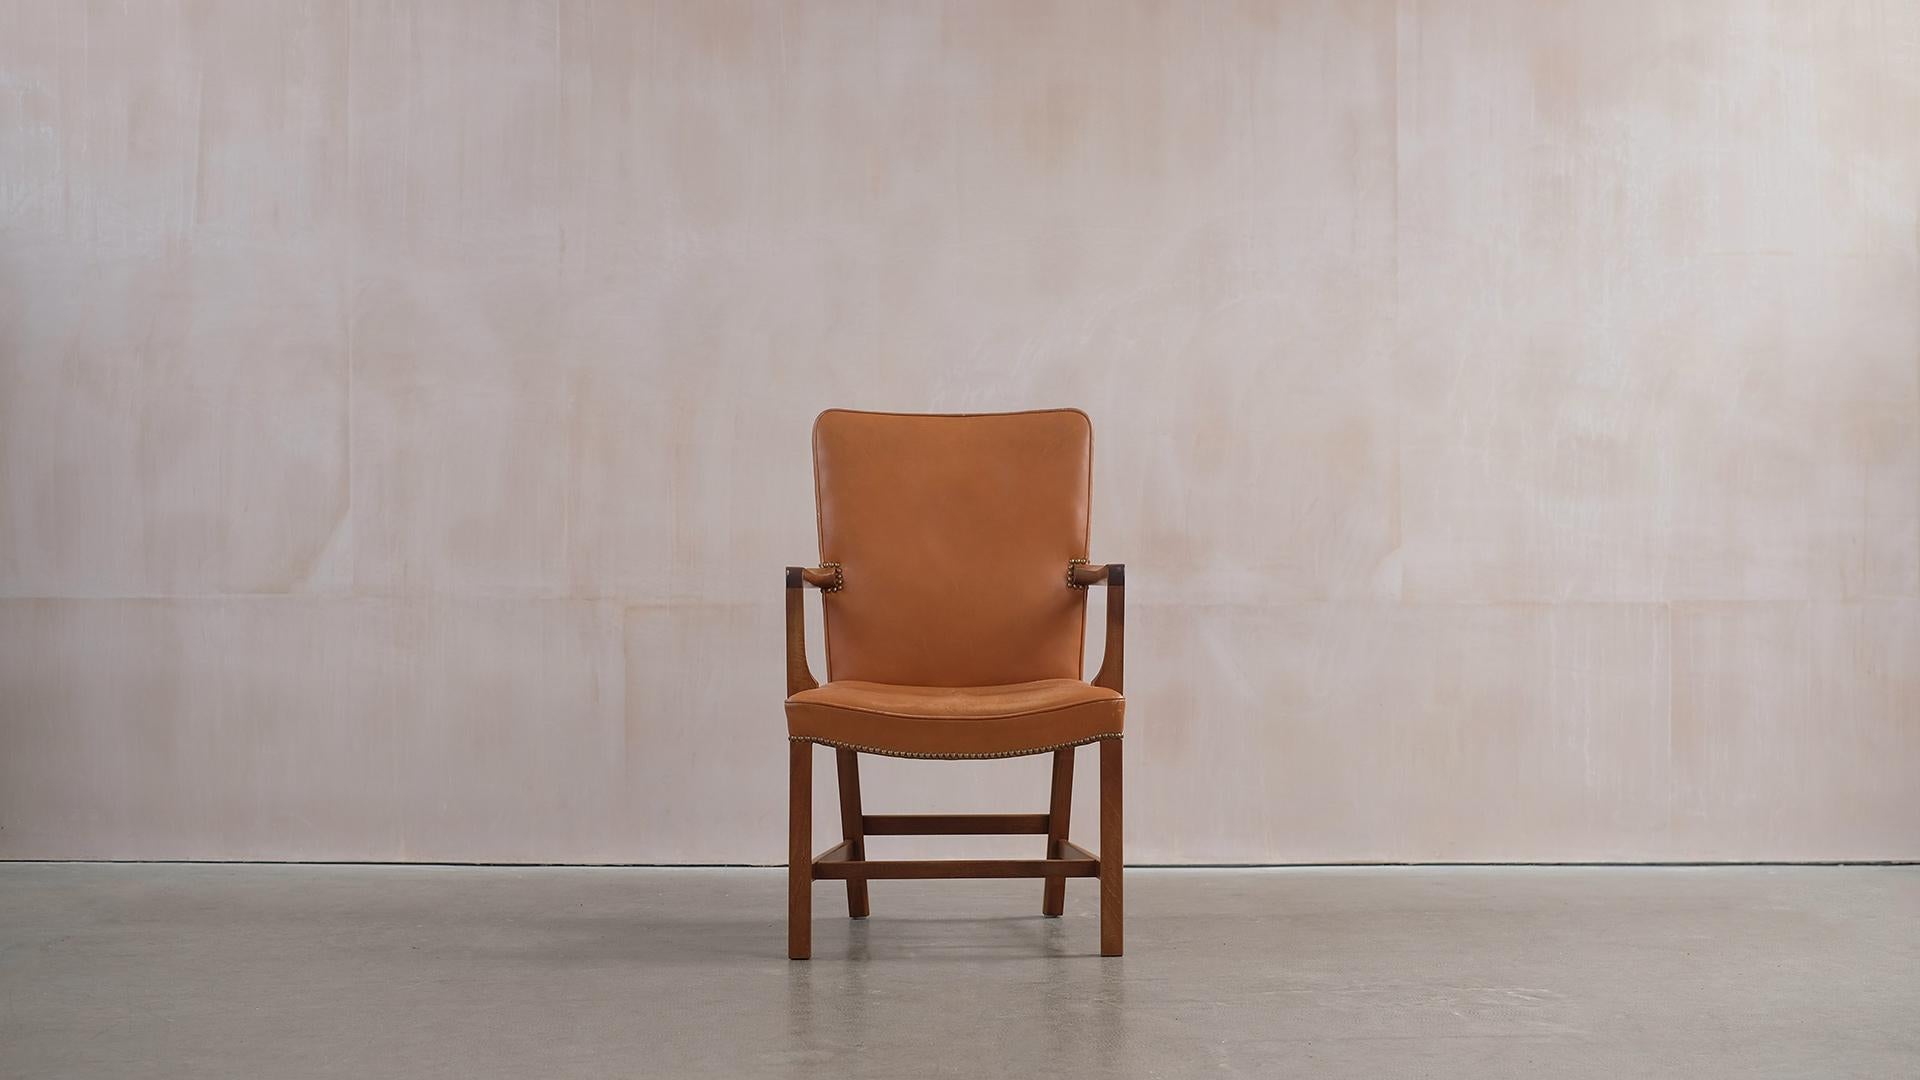 Wonderful Norrevold armchair designed by Kaare Klint in 1939 for master cabinetmaker Rud Rasmussen, Copenhagen. This example in beautiful mahogany and tan coloured patinated leather. Super comfortable and elegant classic chair.  
